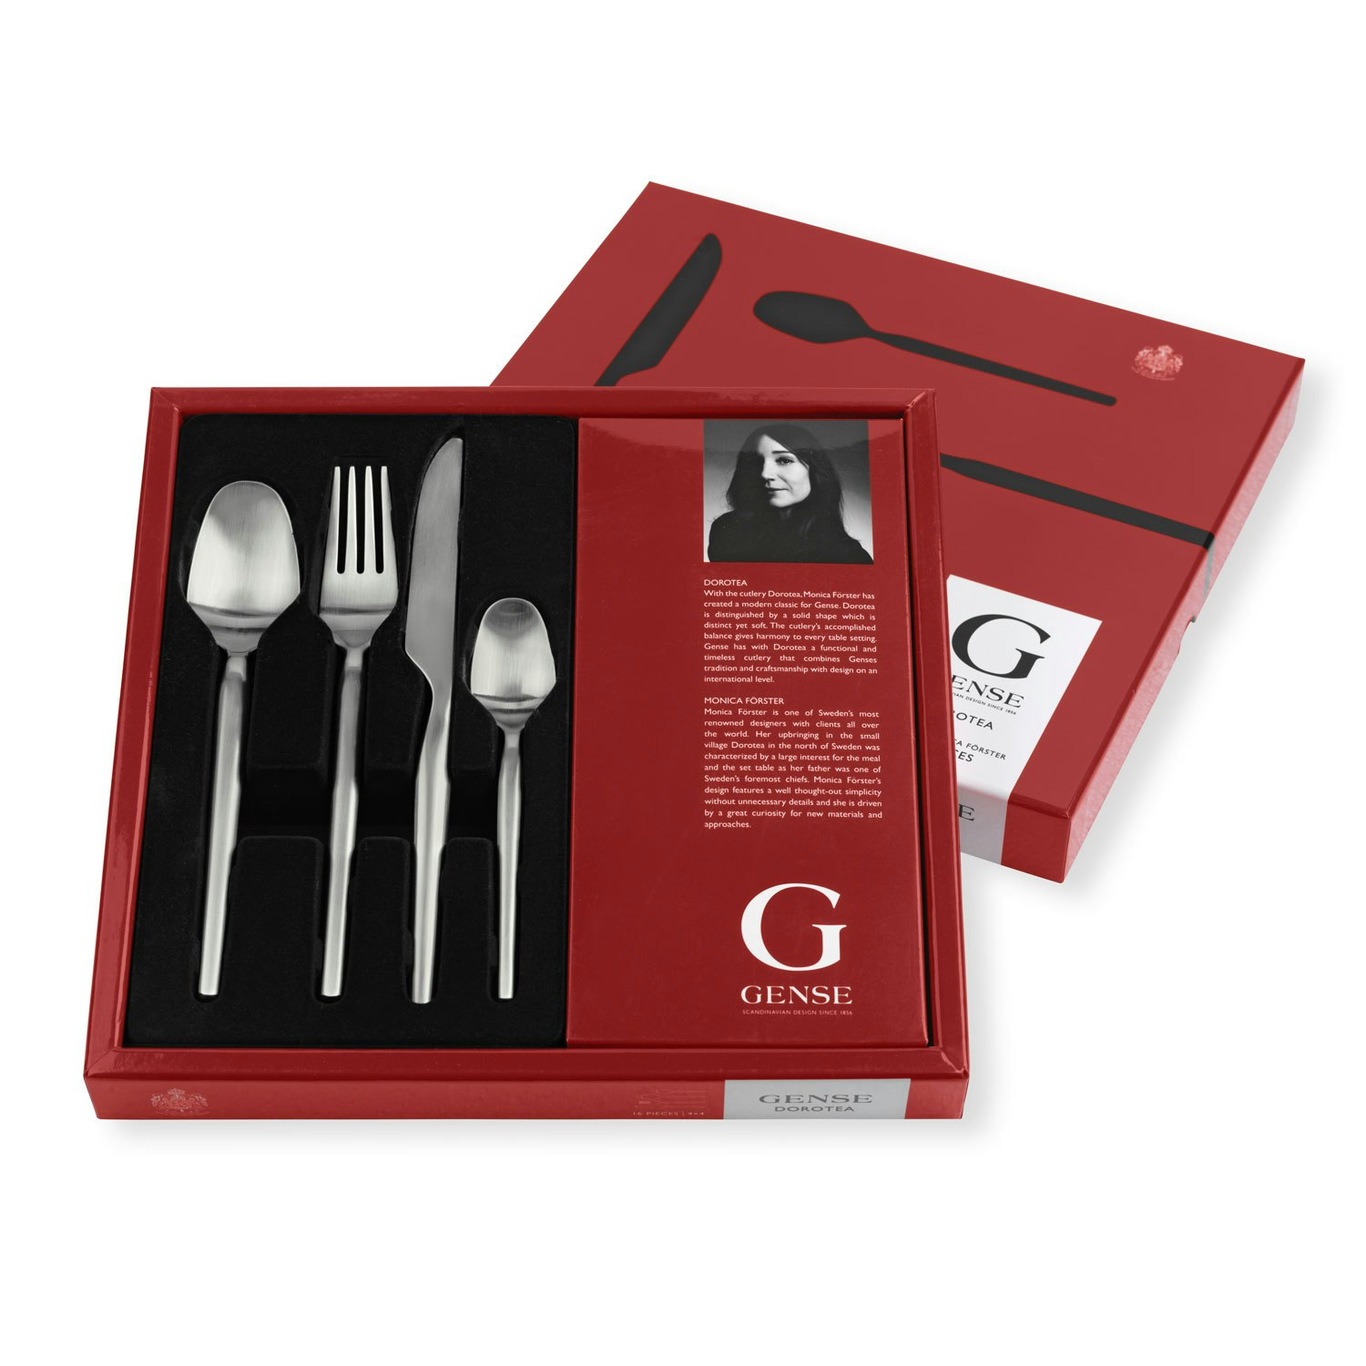 Cutlery Gift Sets - Most Popular Gift Sets